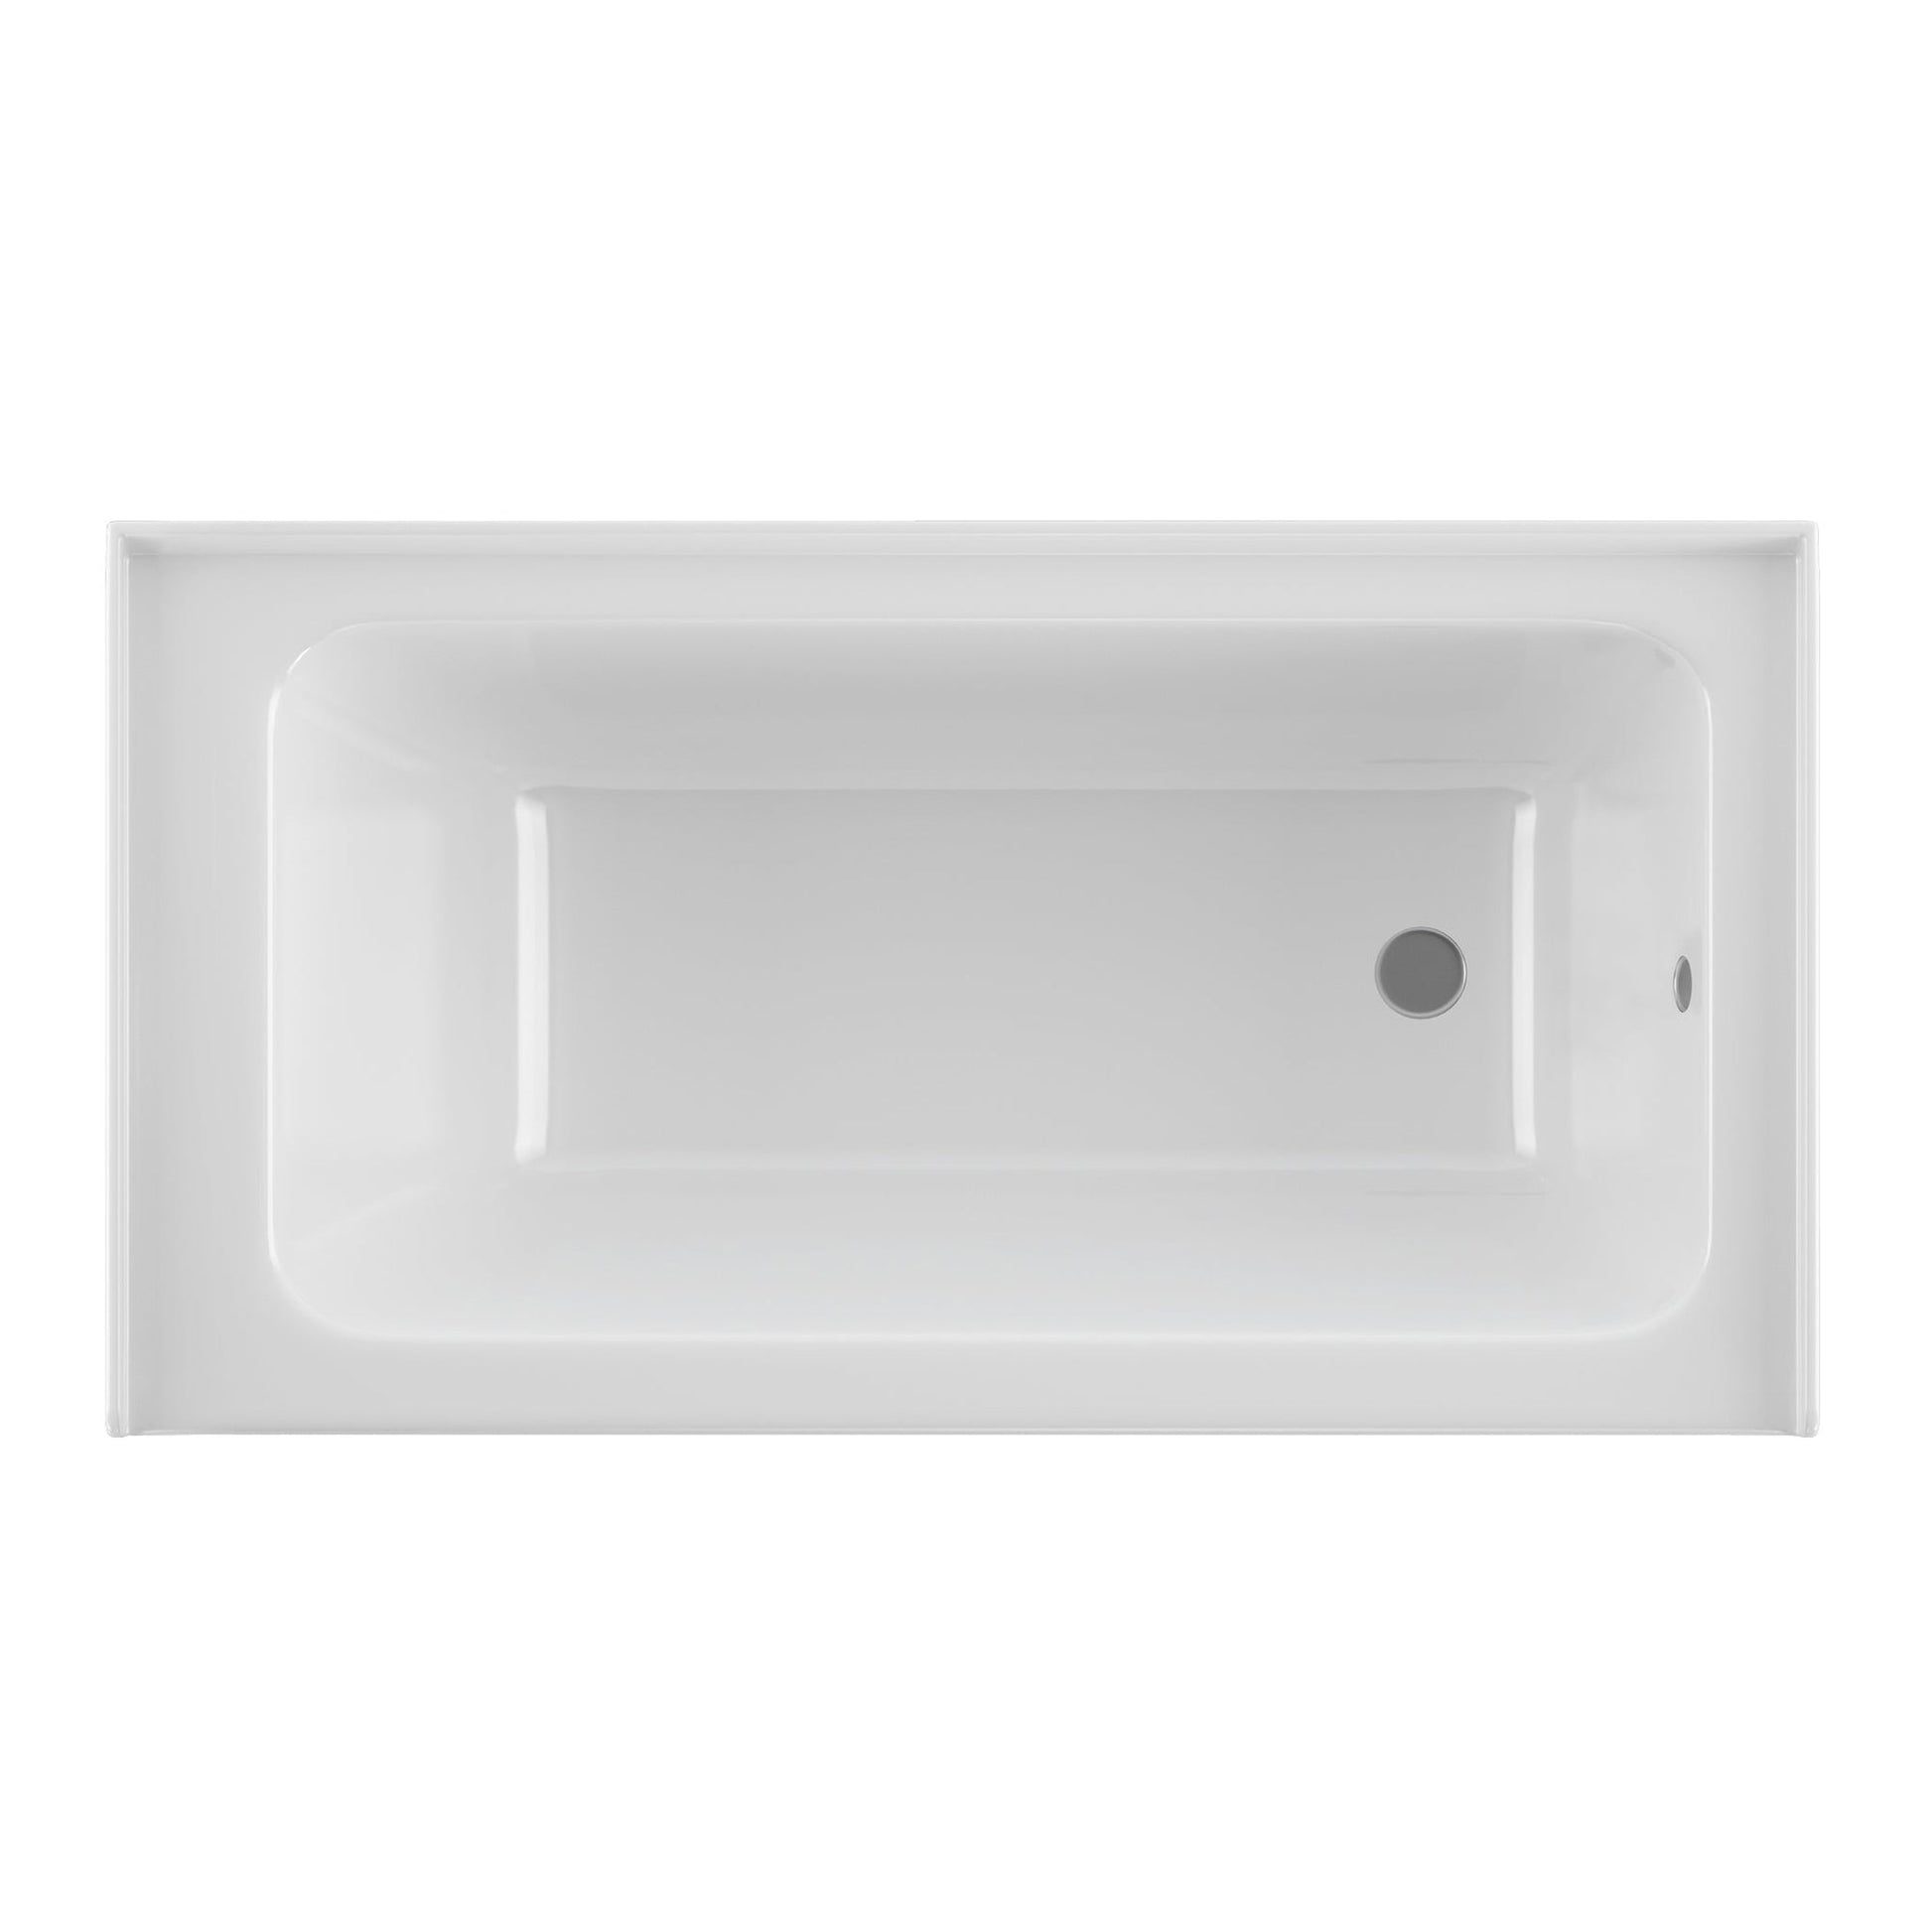 PULSE ShowerSpas 60" W x 32" D Rectangular Glossy White Acrylic Right Drain Placement Alcove Tub